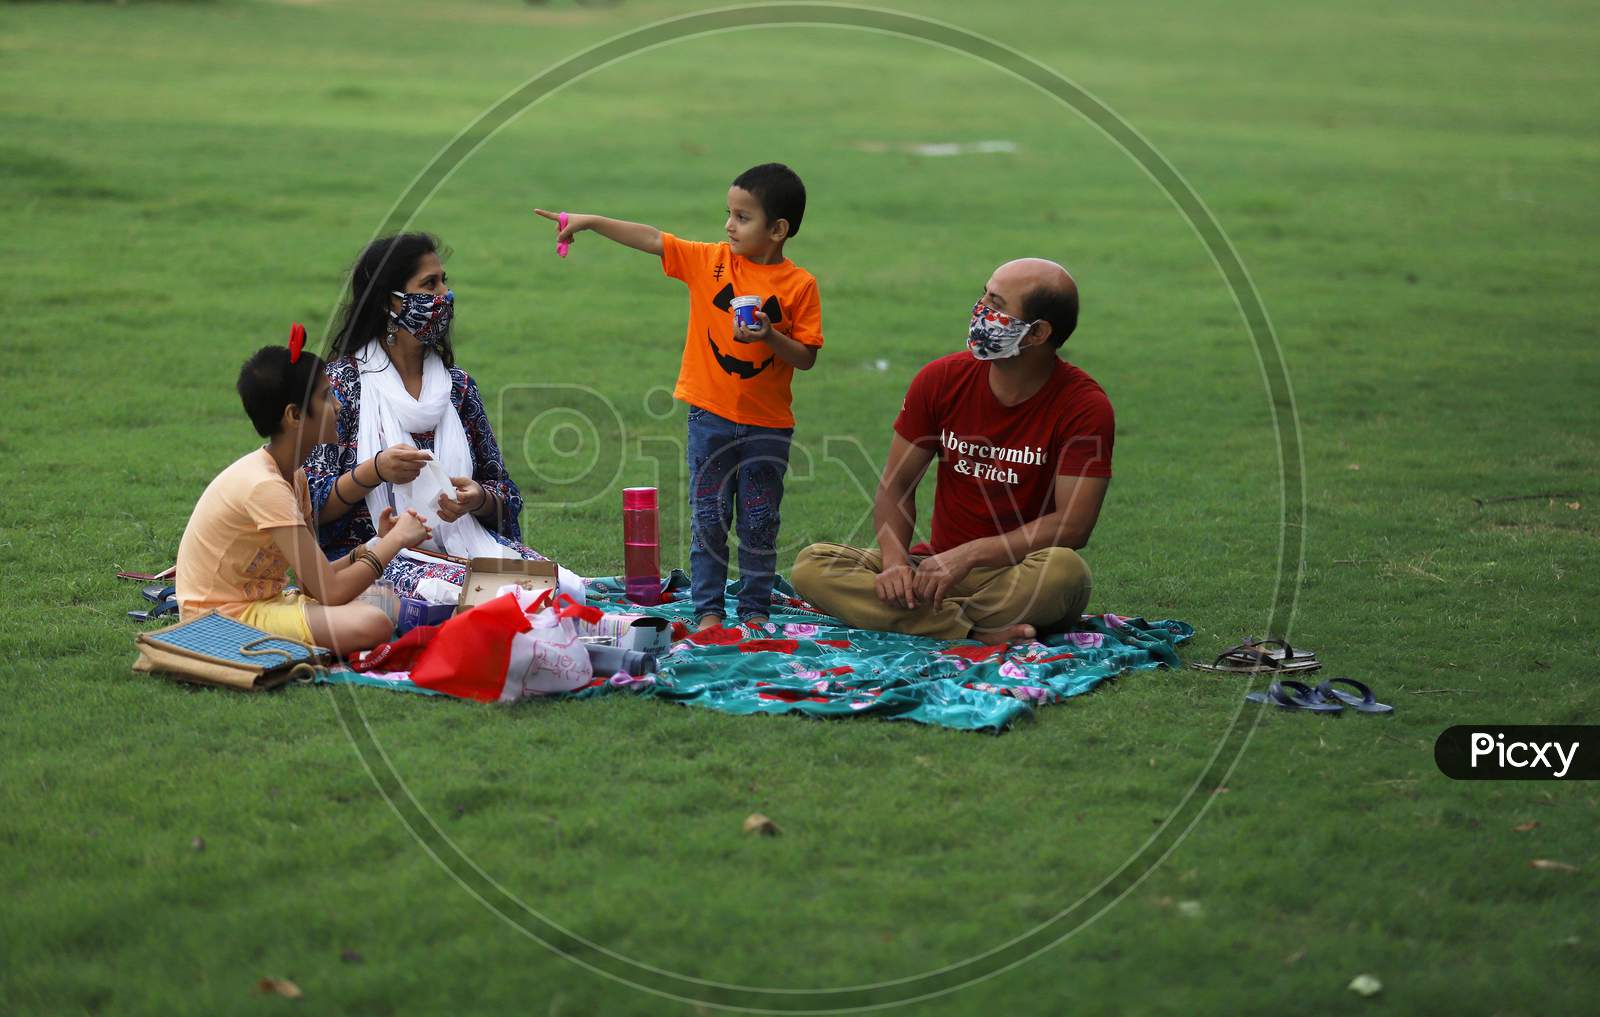 A family of four enjoys an outdoor picnic at Rajpath in New Delhi on July 08, 2020